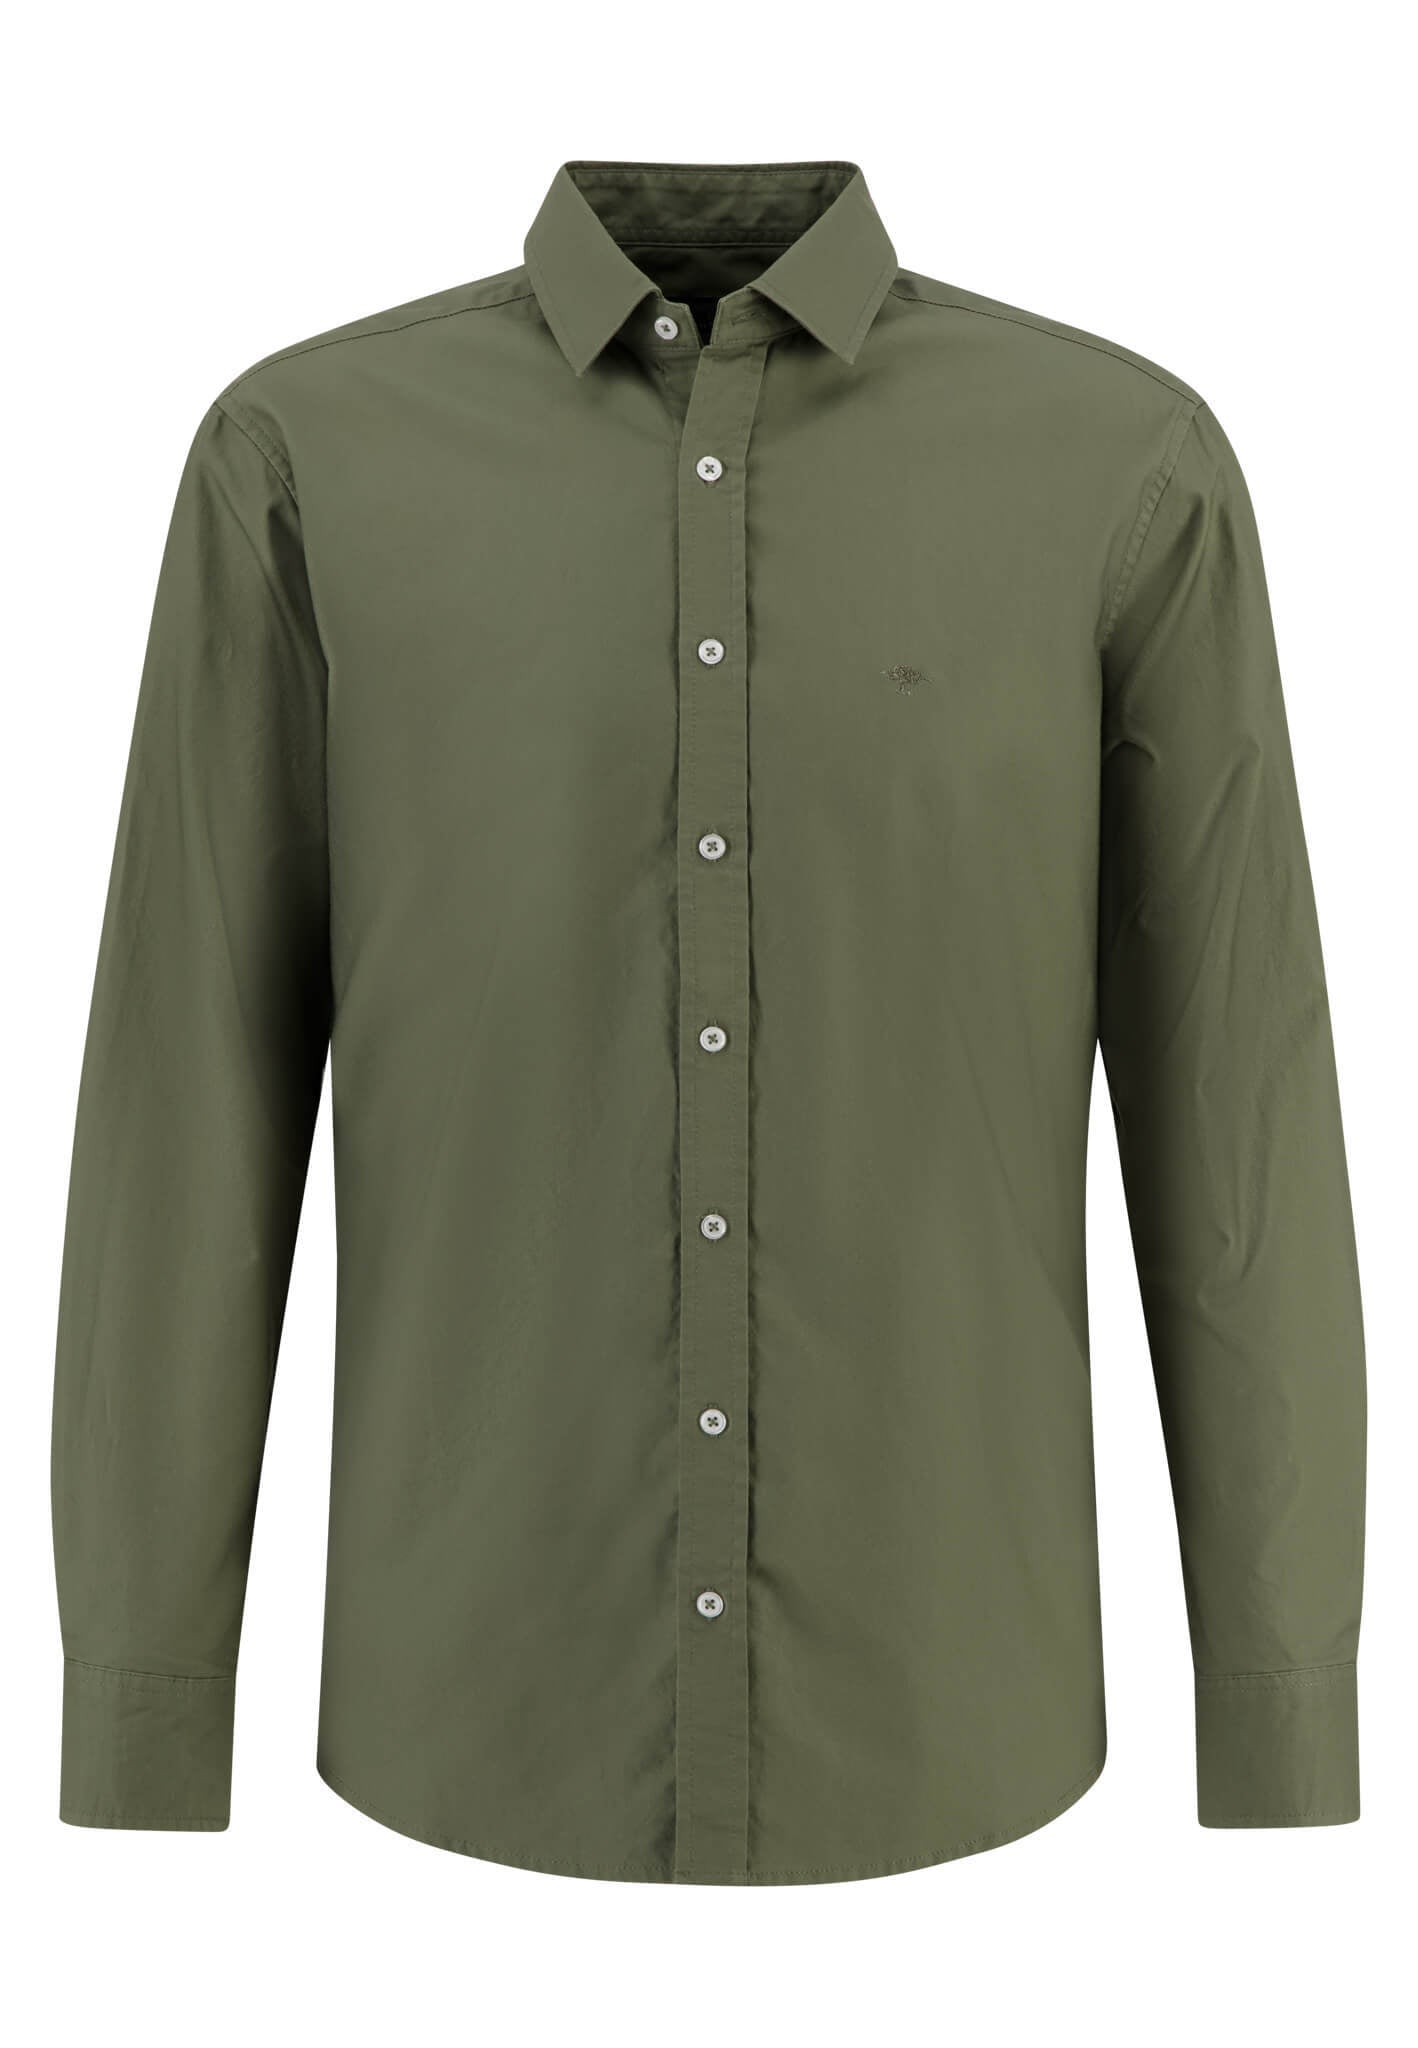 Fynch Hatton, the Washed Oxford, Kent, Long Sleeve